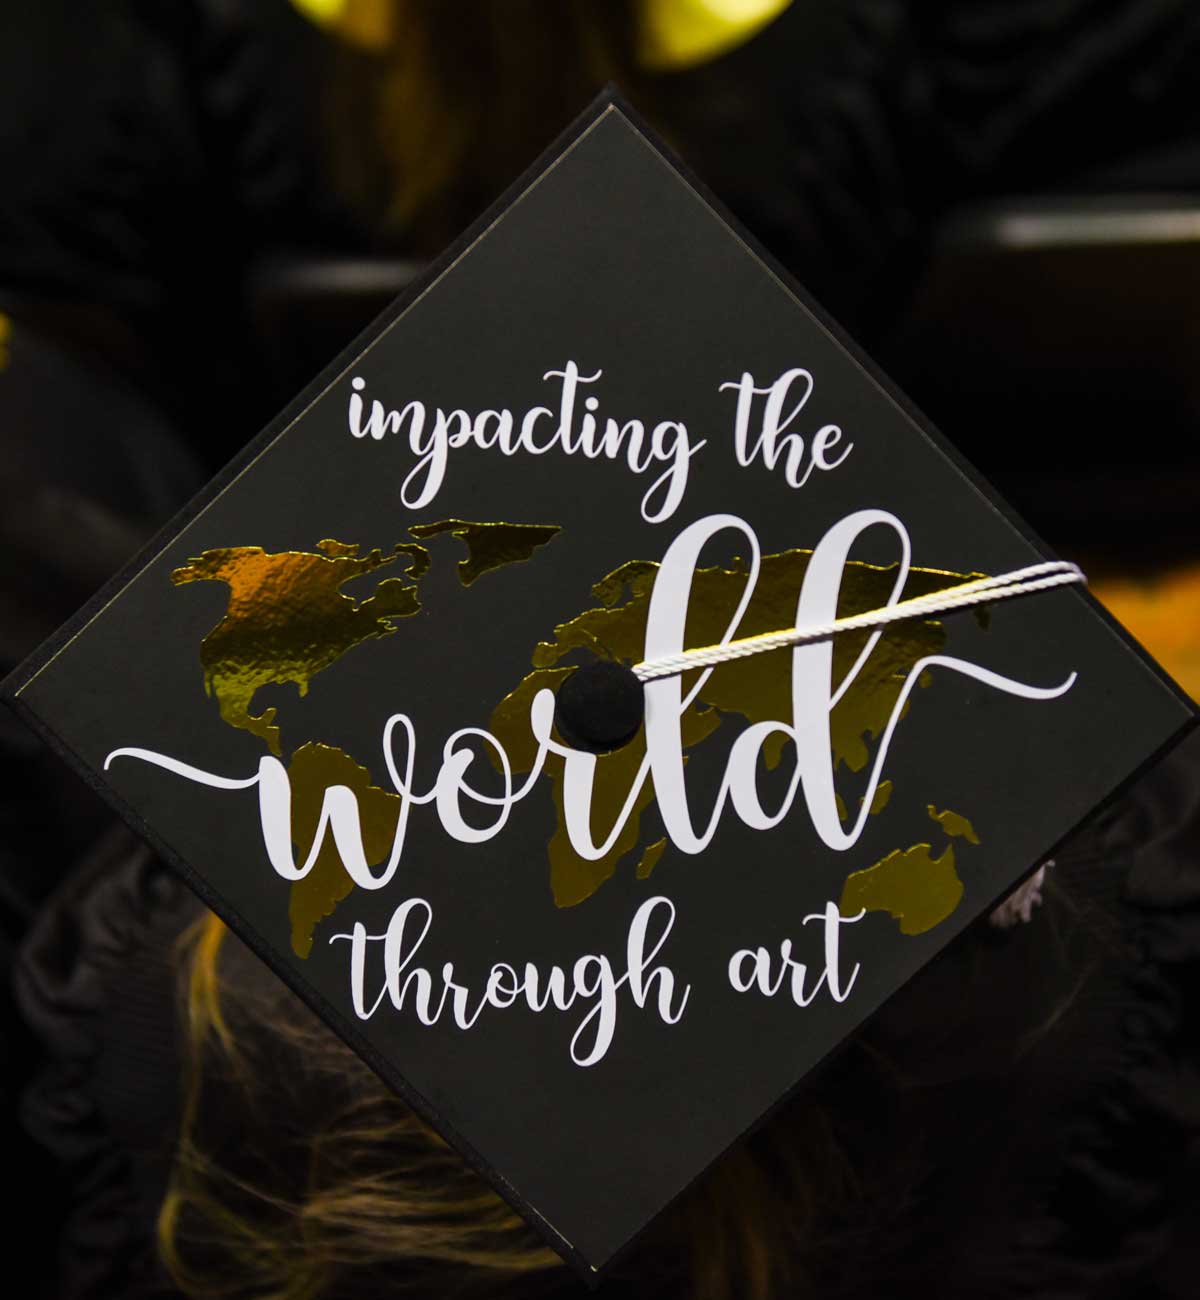 Grad cap decorated with text: Impacting the world through art